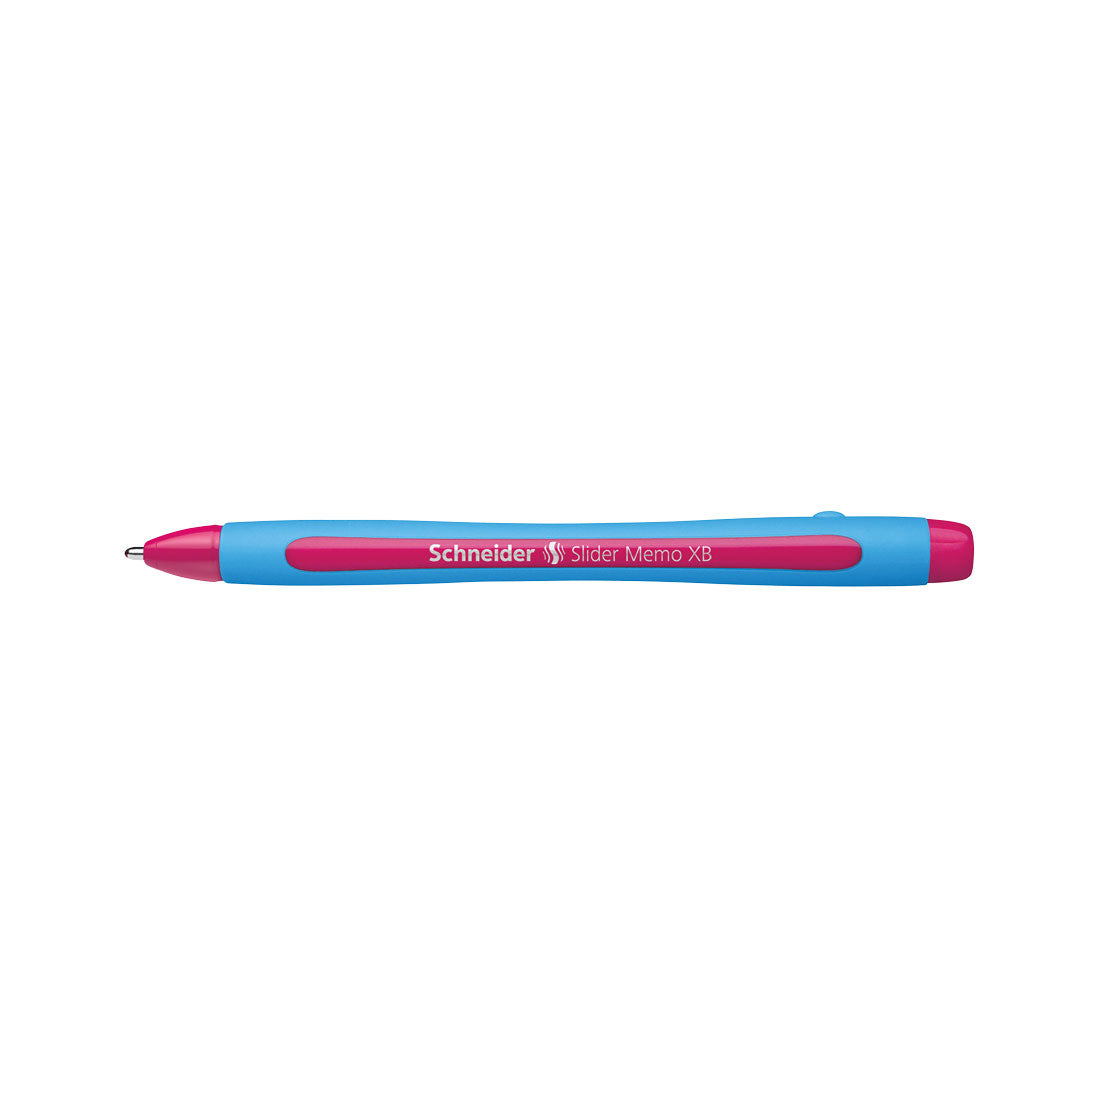 Memo Ballpoint Pen XB, Box of 10#ink-color_pink